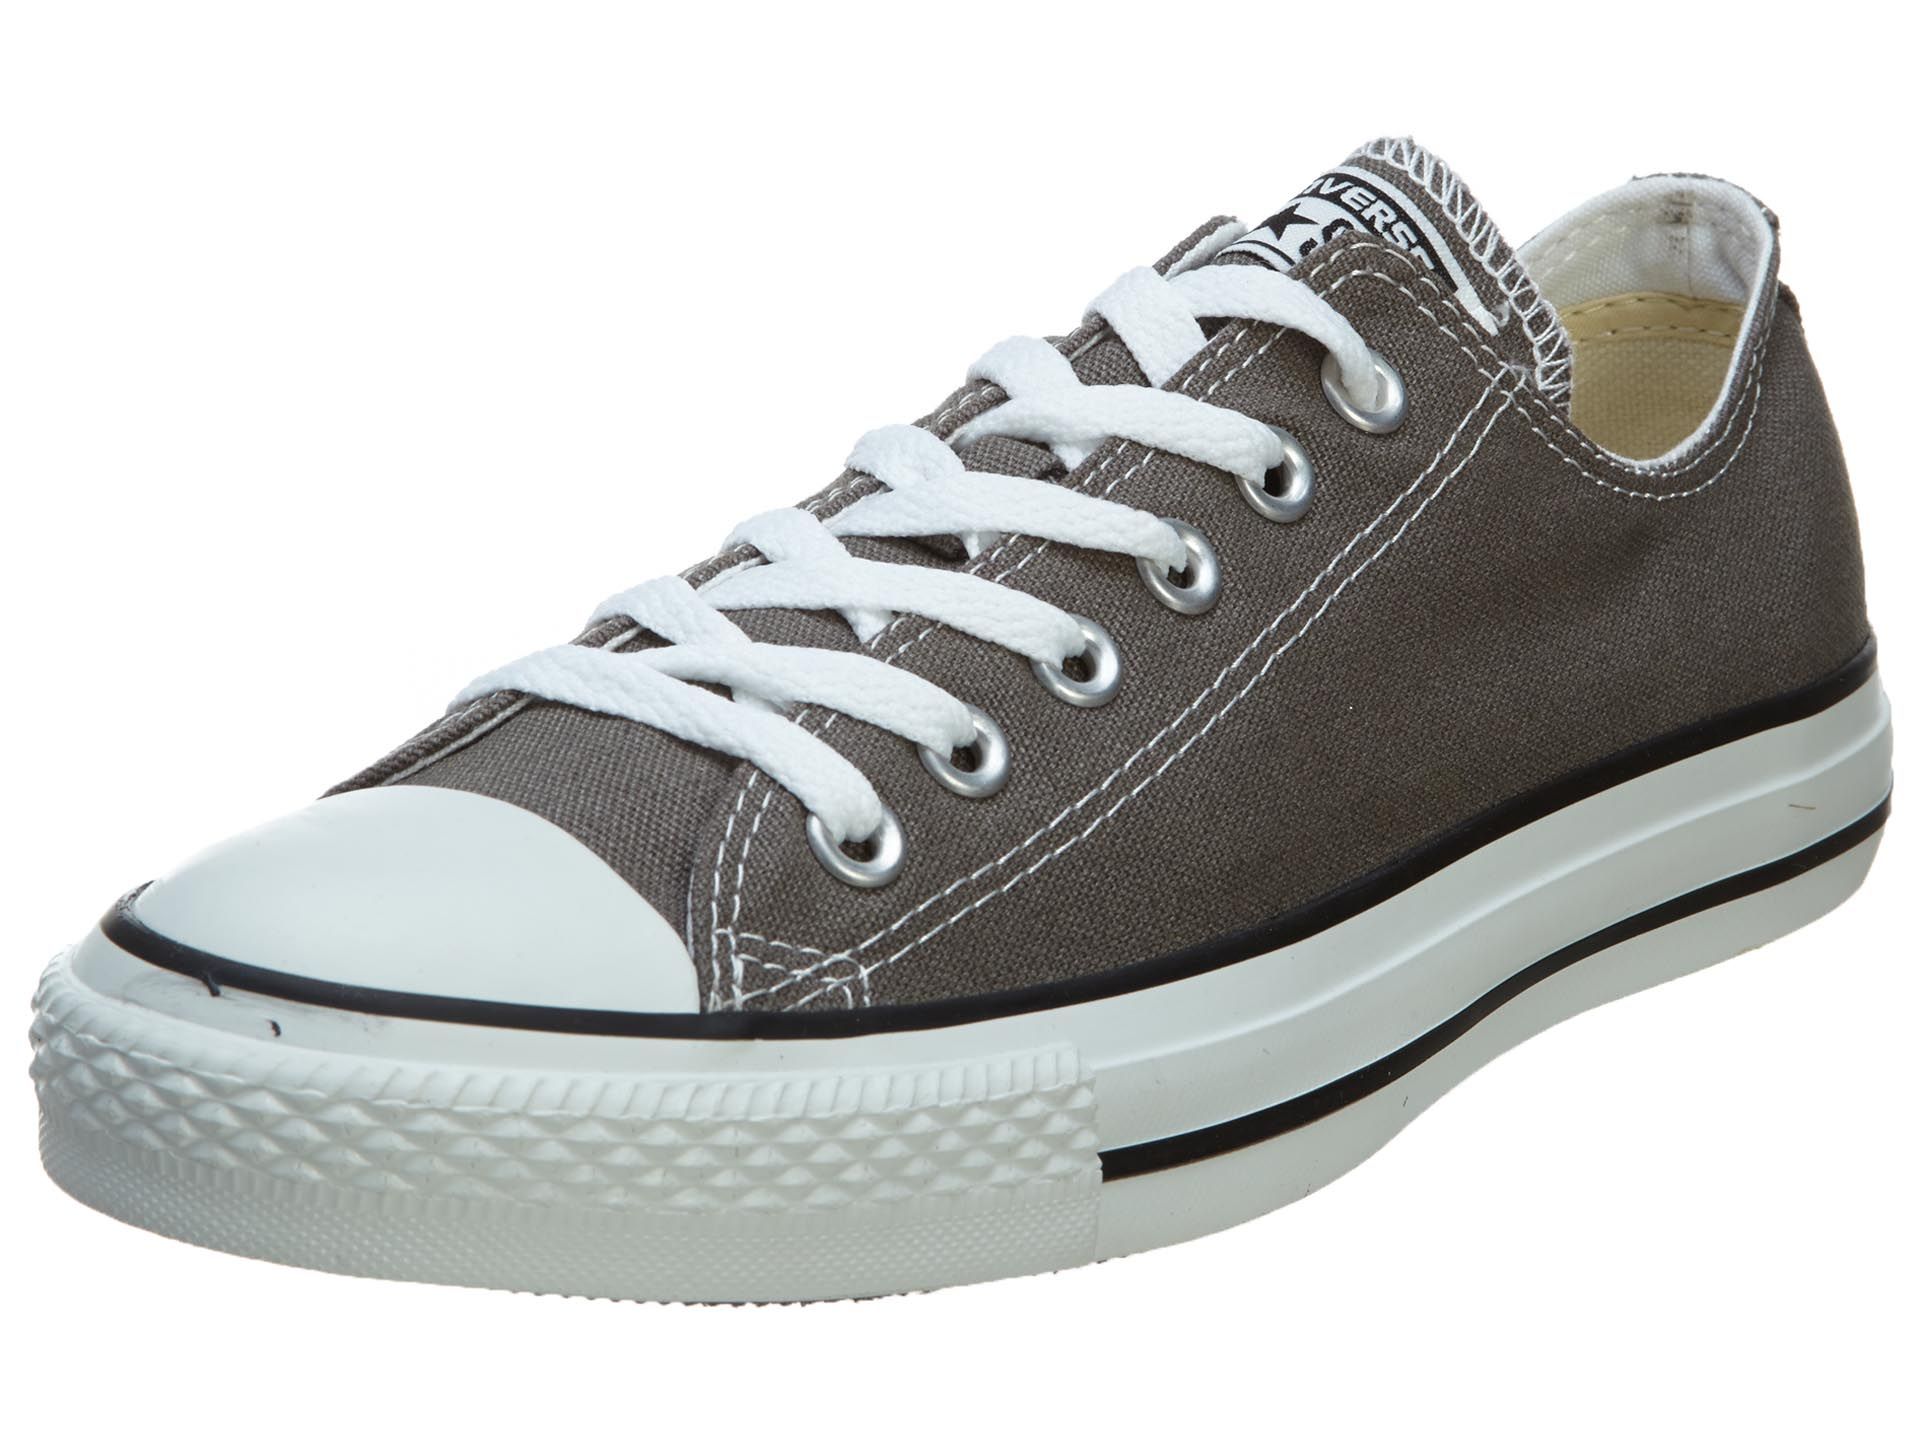 converse ox charcoal